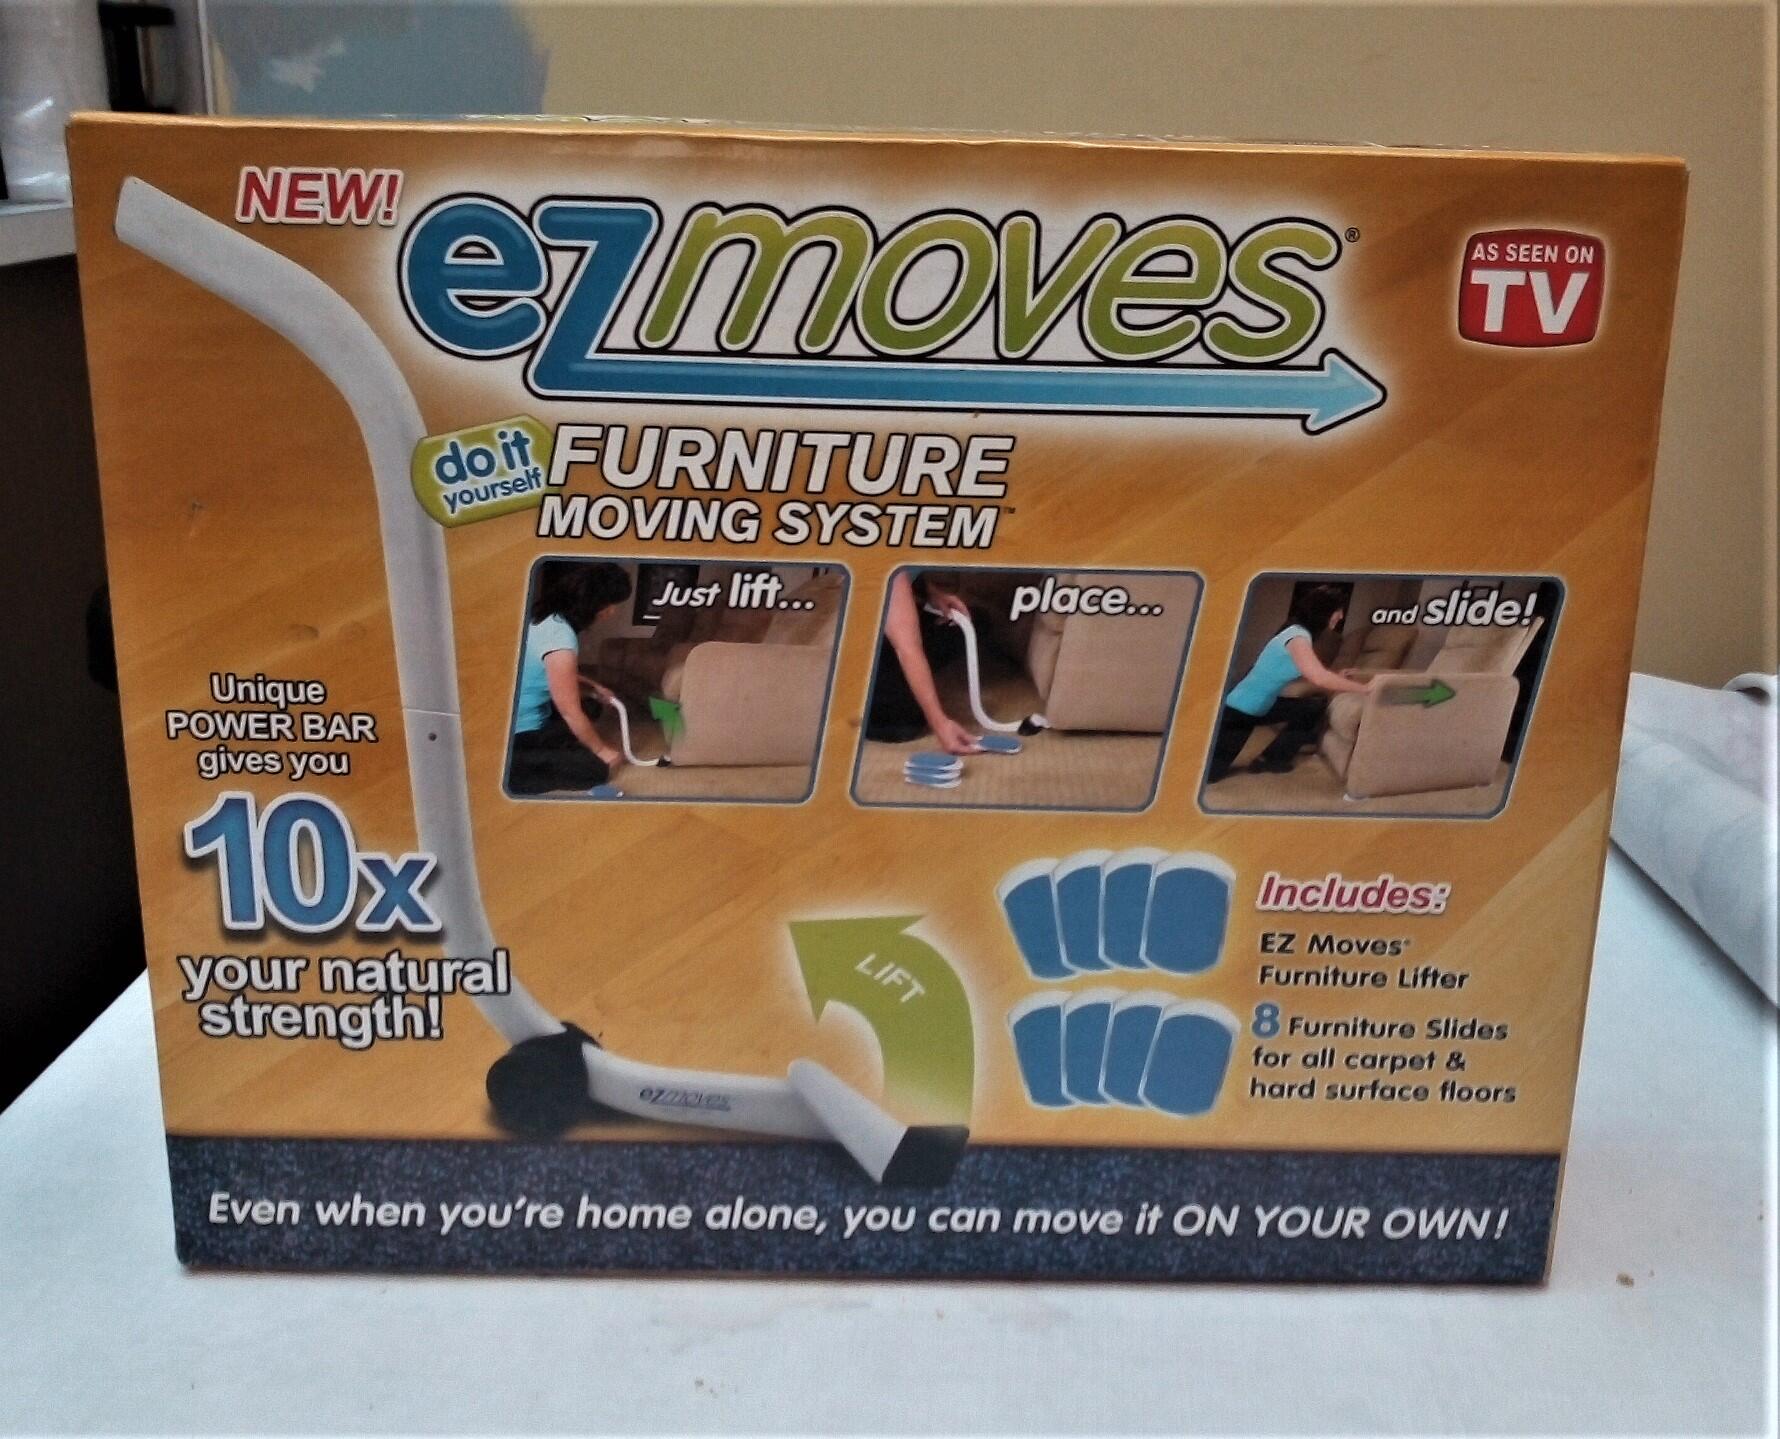 EZ Moves Furniture Moving System, Do It Yourself